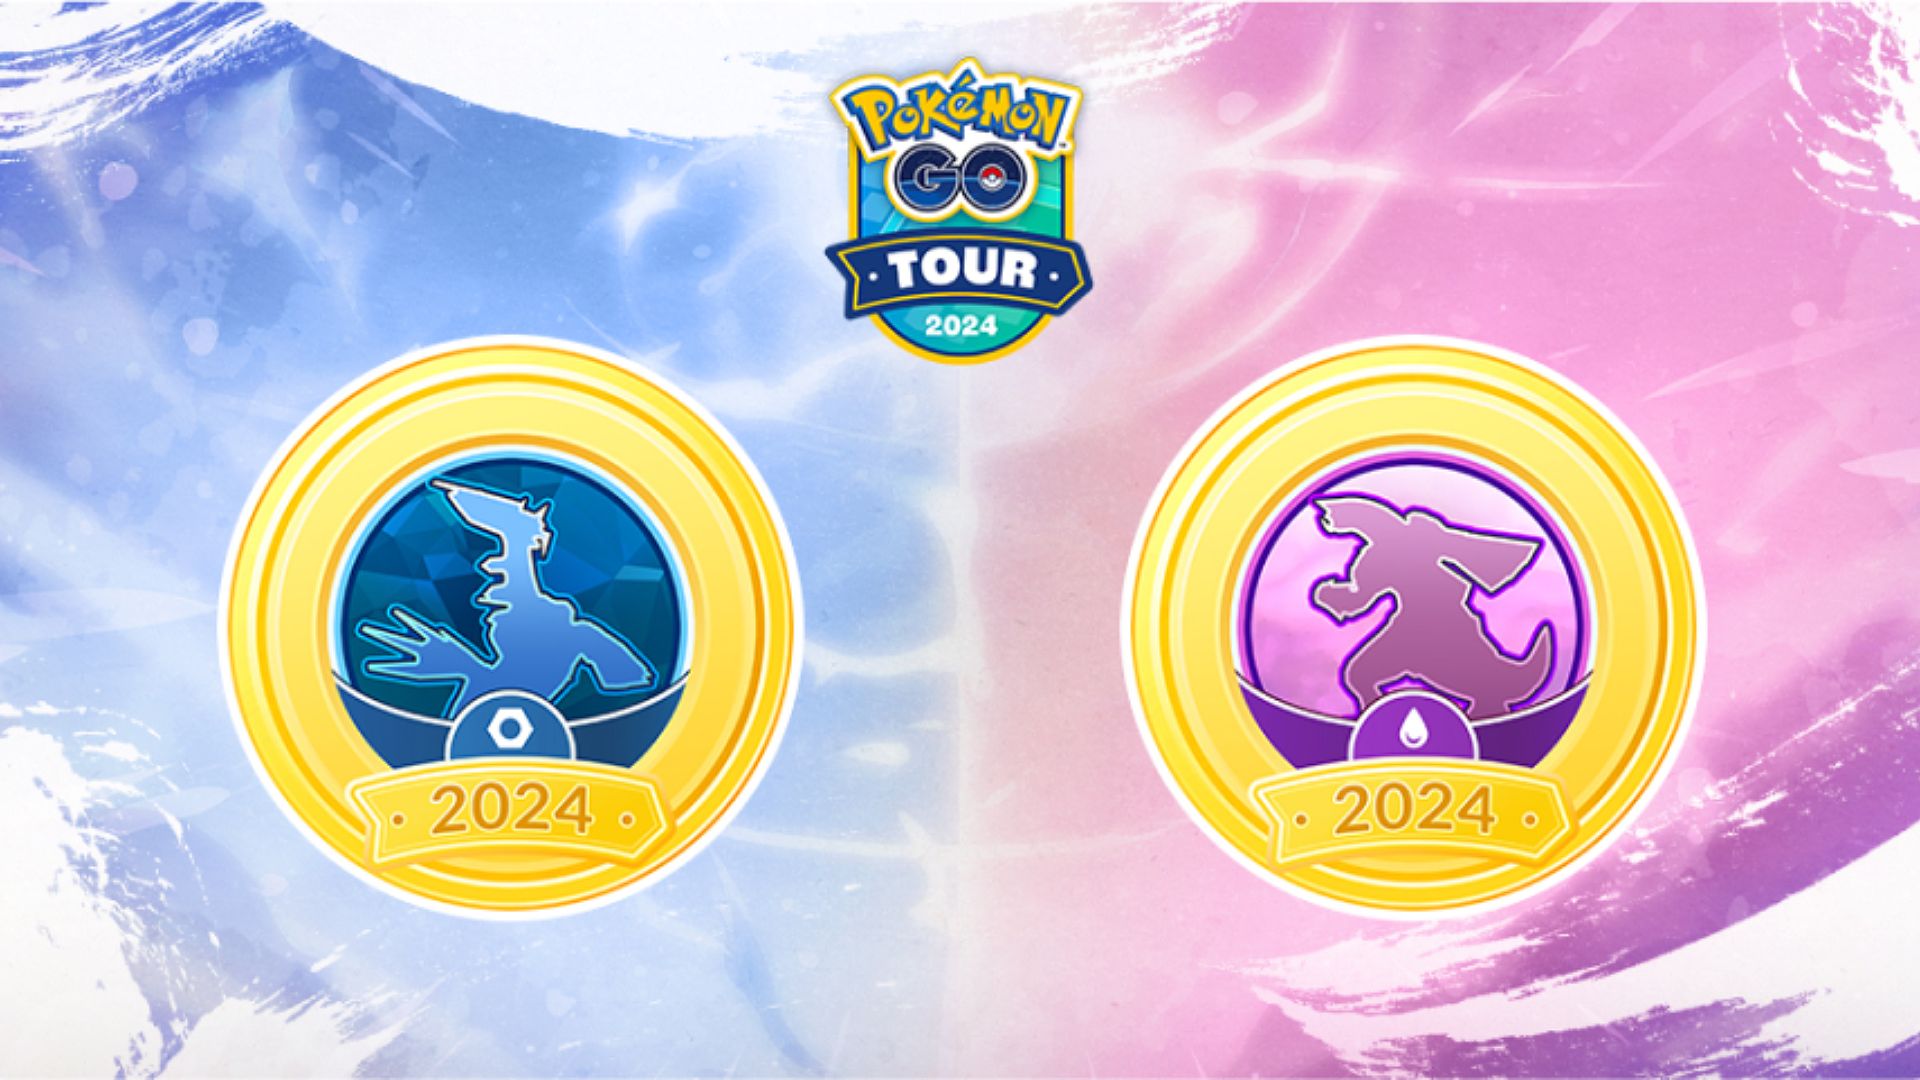 Diamond and Pearl badges in the Pokemon Go Tour Sinnoh event